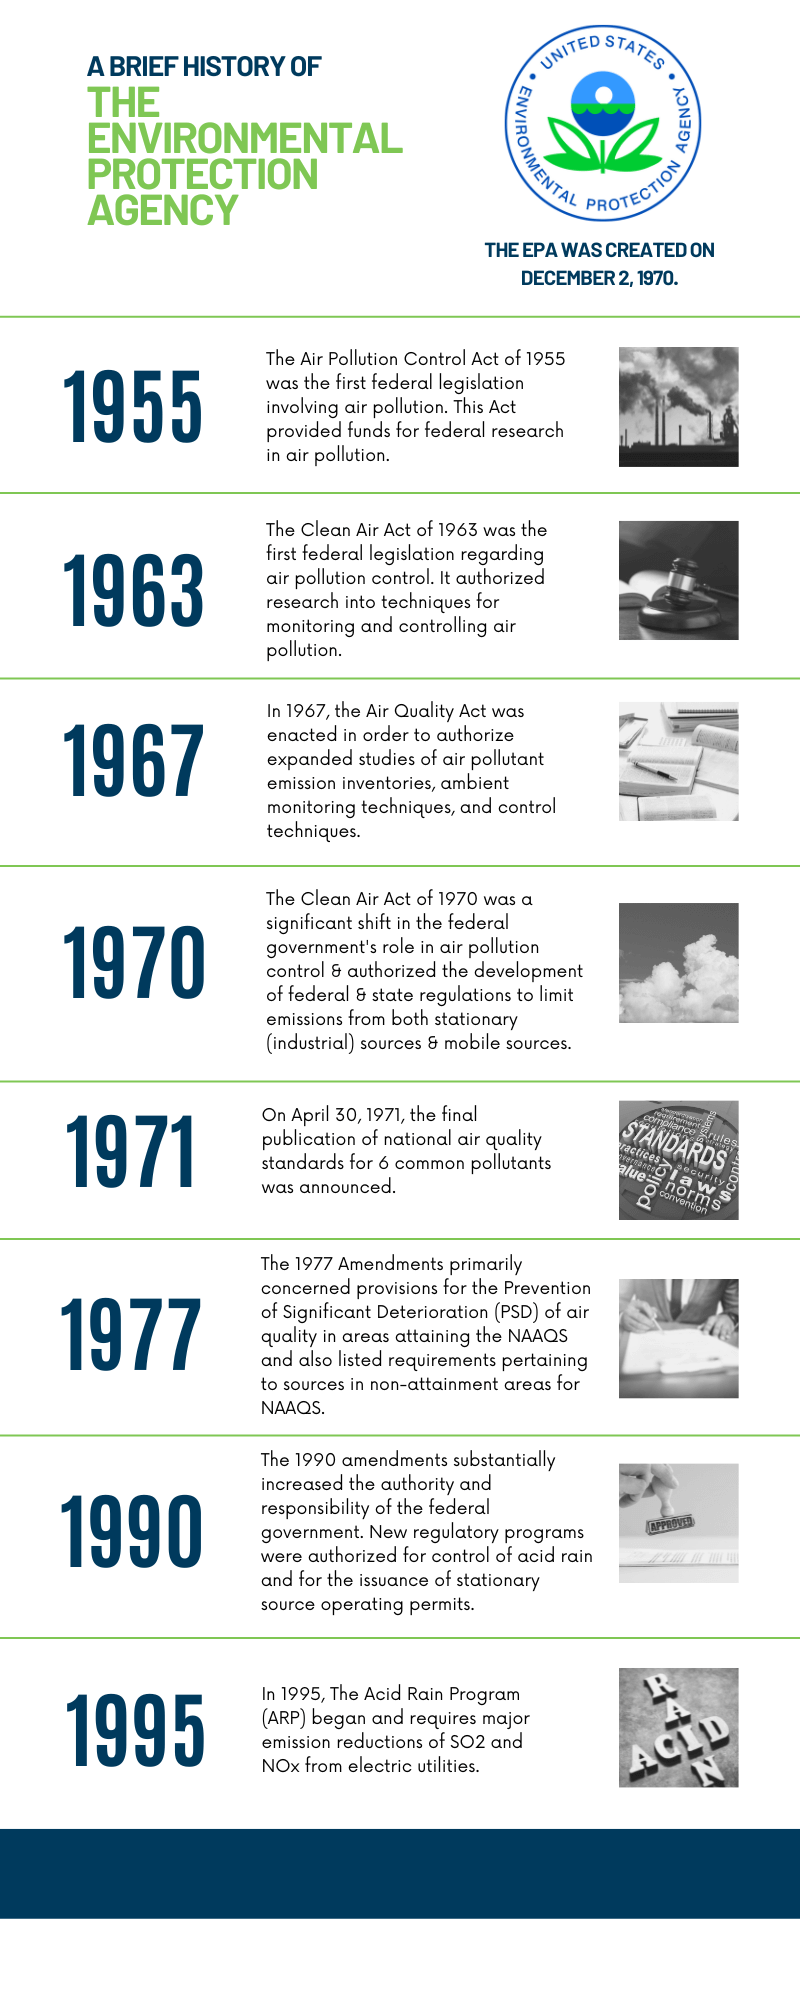 timeline of air emissions regulations within the EPA from 1955 - 1990